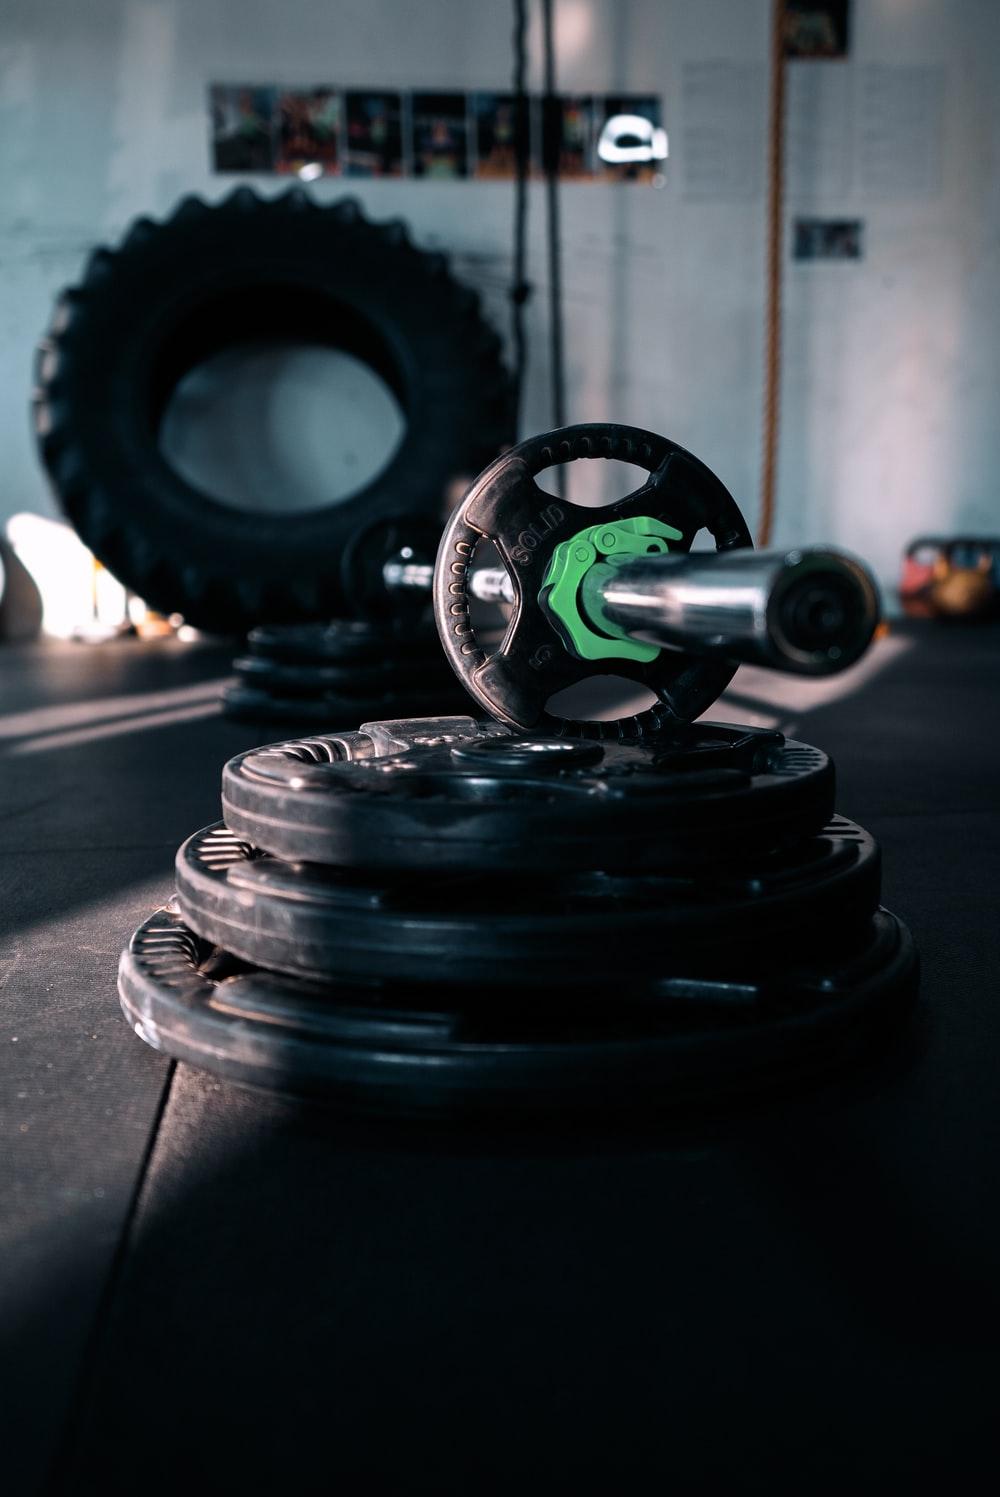 Weightlifting can be done at home with a barbell and a set of weight plates. Photo from Unsplash.